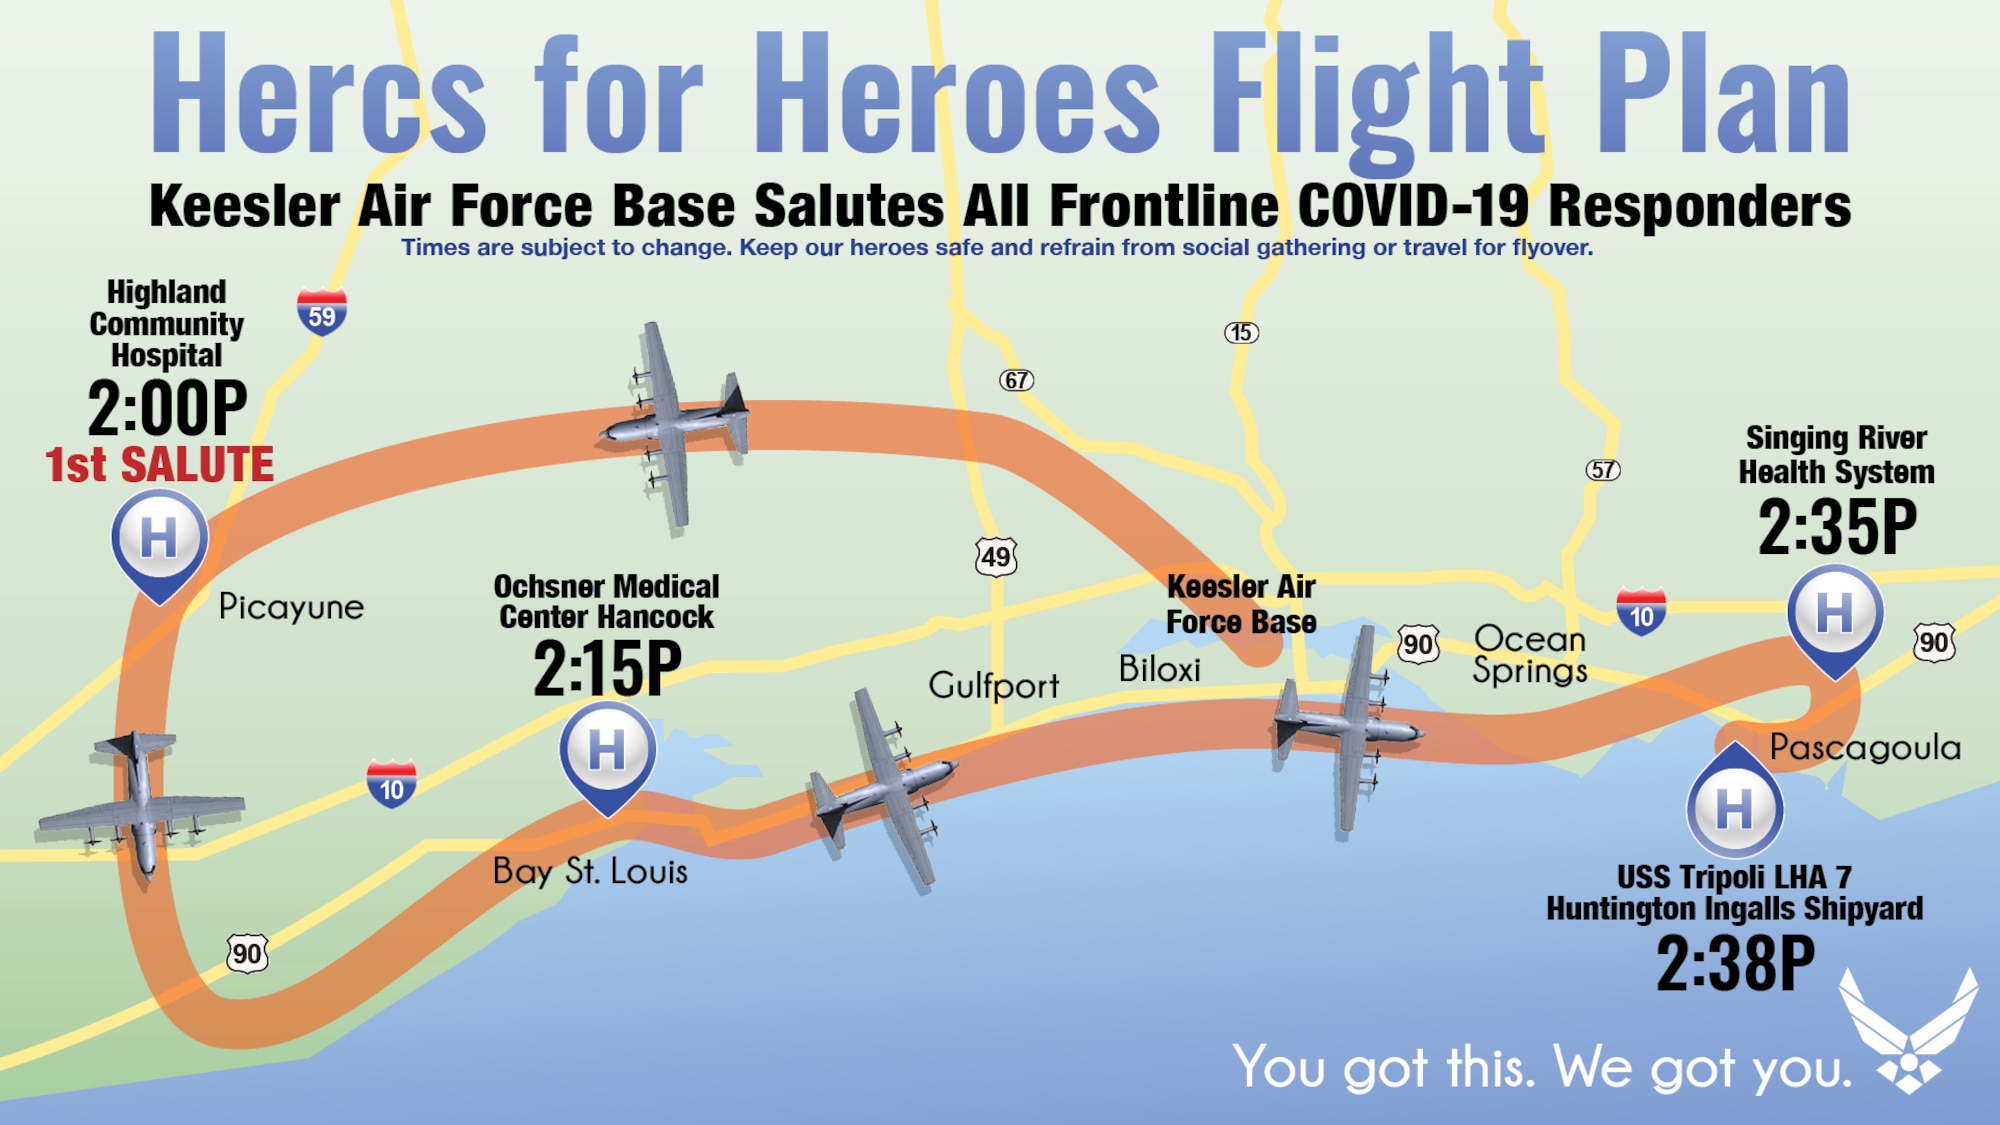 The 403rd Wing is planning an additional flyby for Picayune, Bay Saint Louis, and Pascagoula the afternoon of May 5 in honor of health-care workers, first responders, and essential personnel battling the spread of COVID-19. (U.S. Air Force graphic)